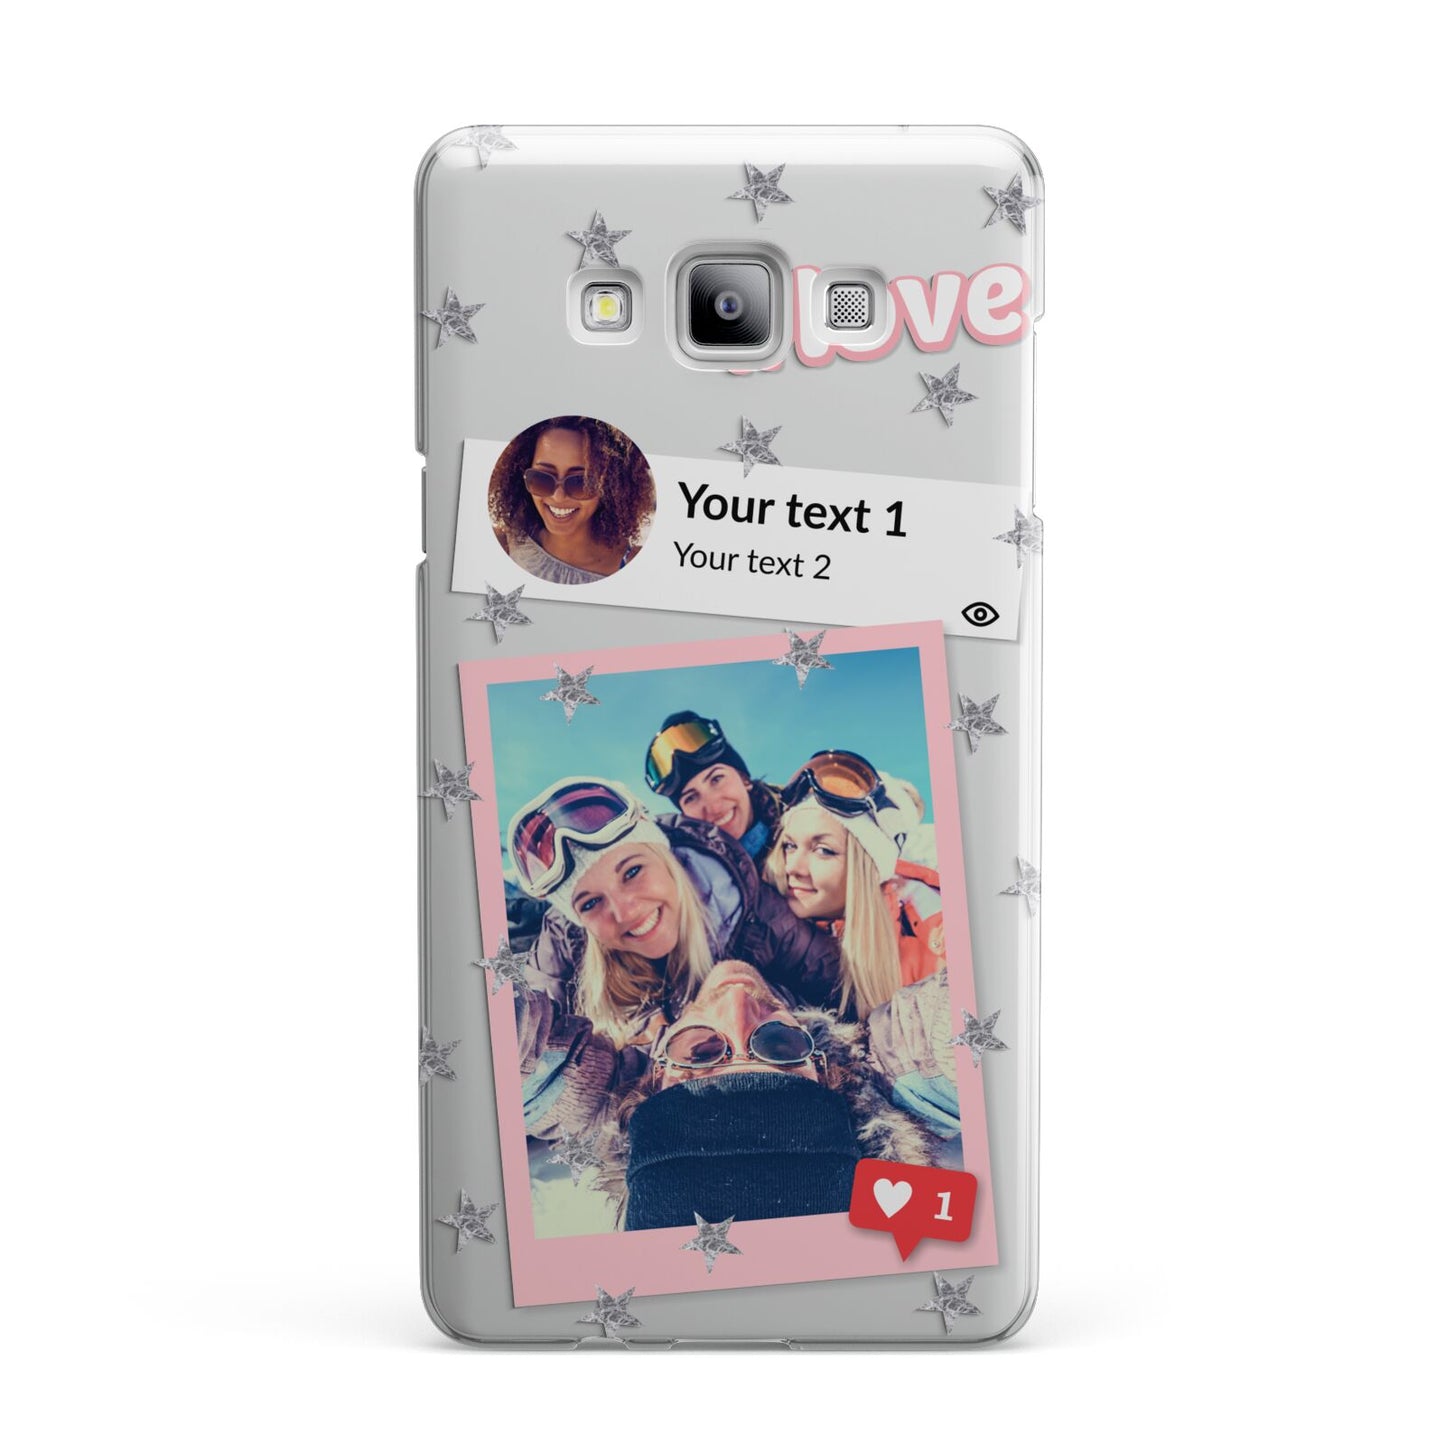 Starry Social Media Photo Montage Upload with Text Samsung Galaxy A7 2015 Case